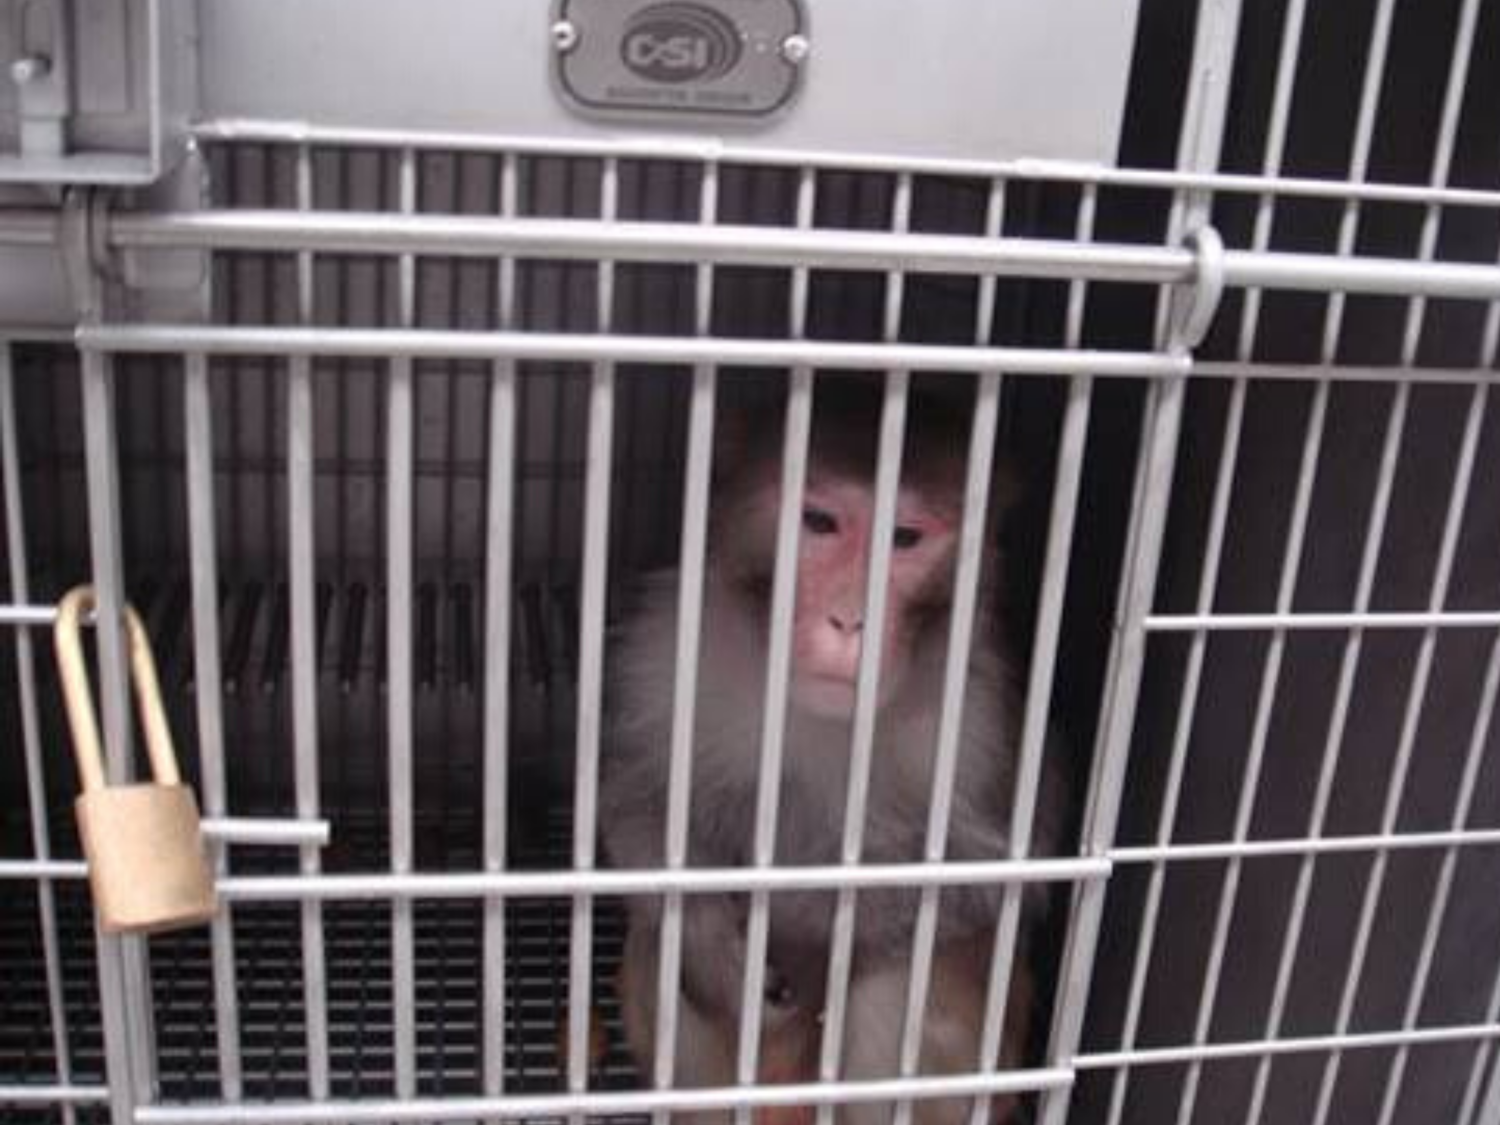 Loverboy, a melancholy rhesus monkey, sits alone in a sterile, cold, metal cage